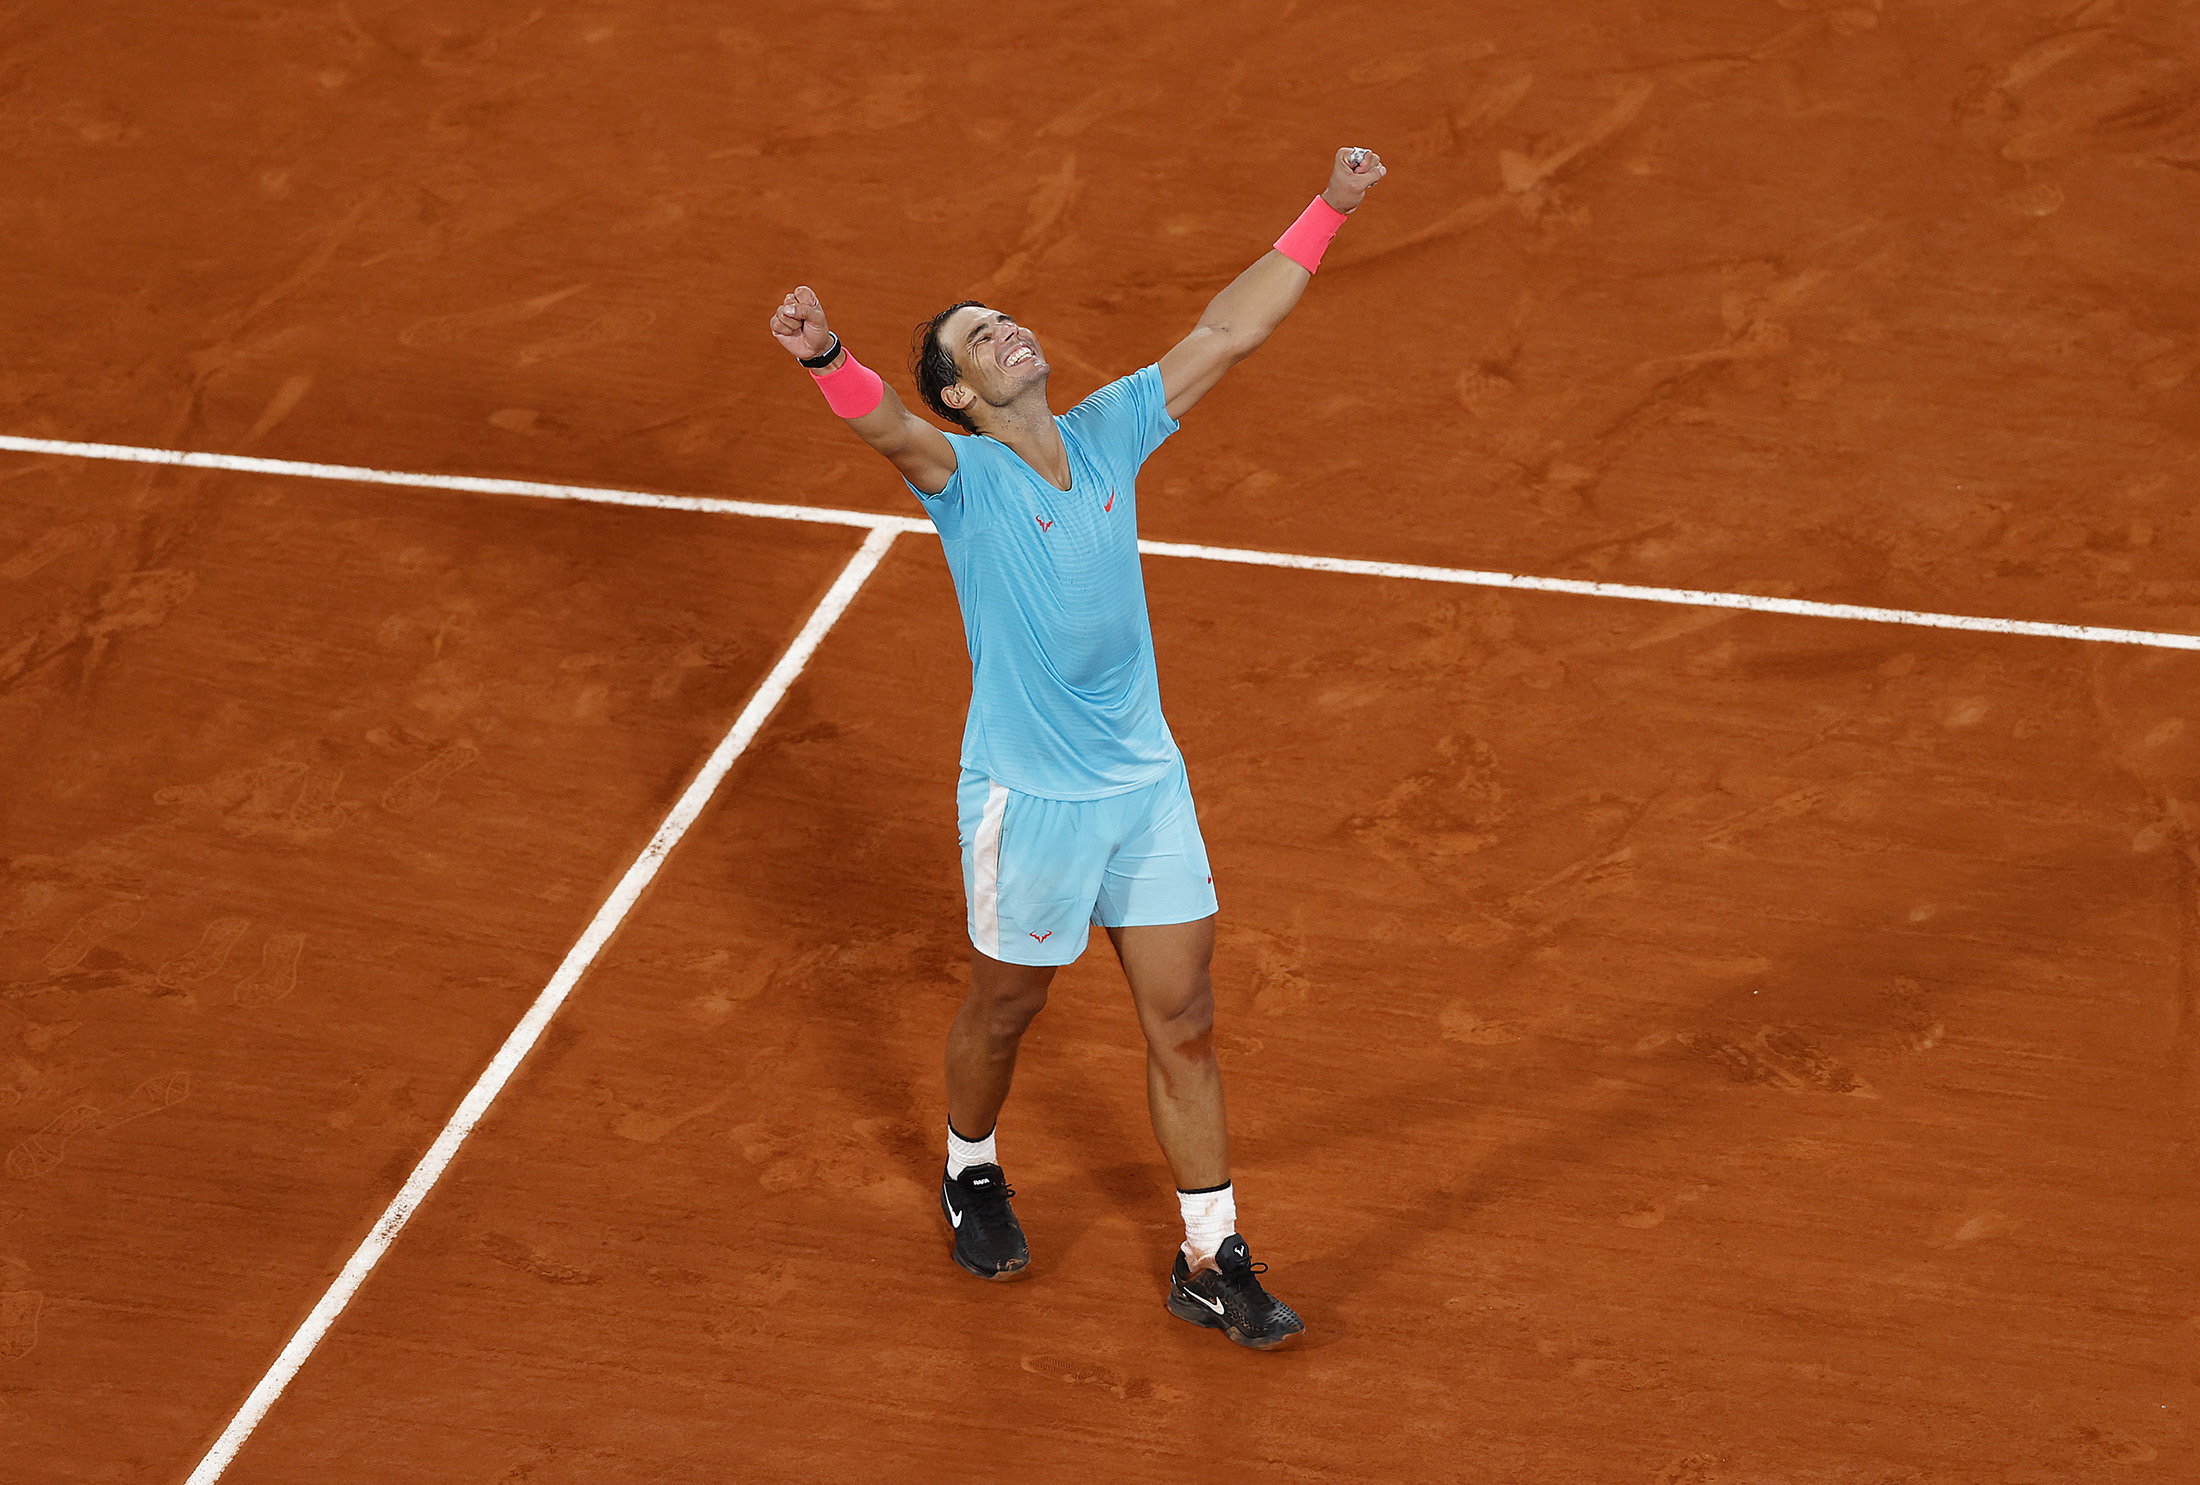 Rafael Nadal&nbsp;celebrates after winning championship point against Novak Djokovic of Serbia during&nbsp;the 2020 French Open at Roland Garros in Paris, France, on Oct.&nbsp;11.